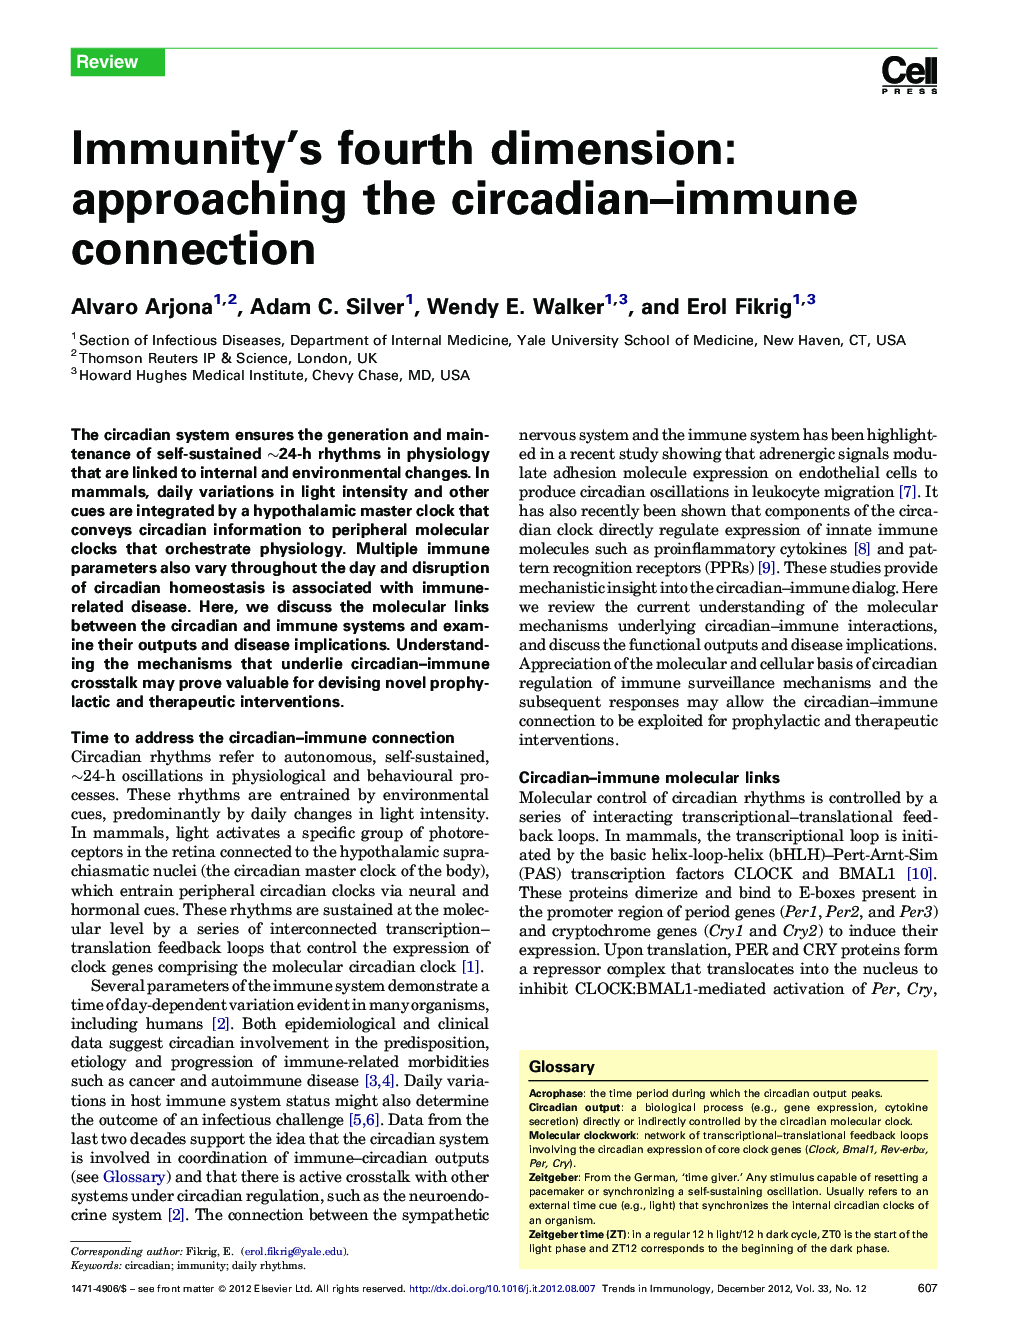 Immunity's fourth dimension: approaching the circadian–immune connection